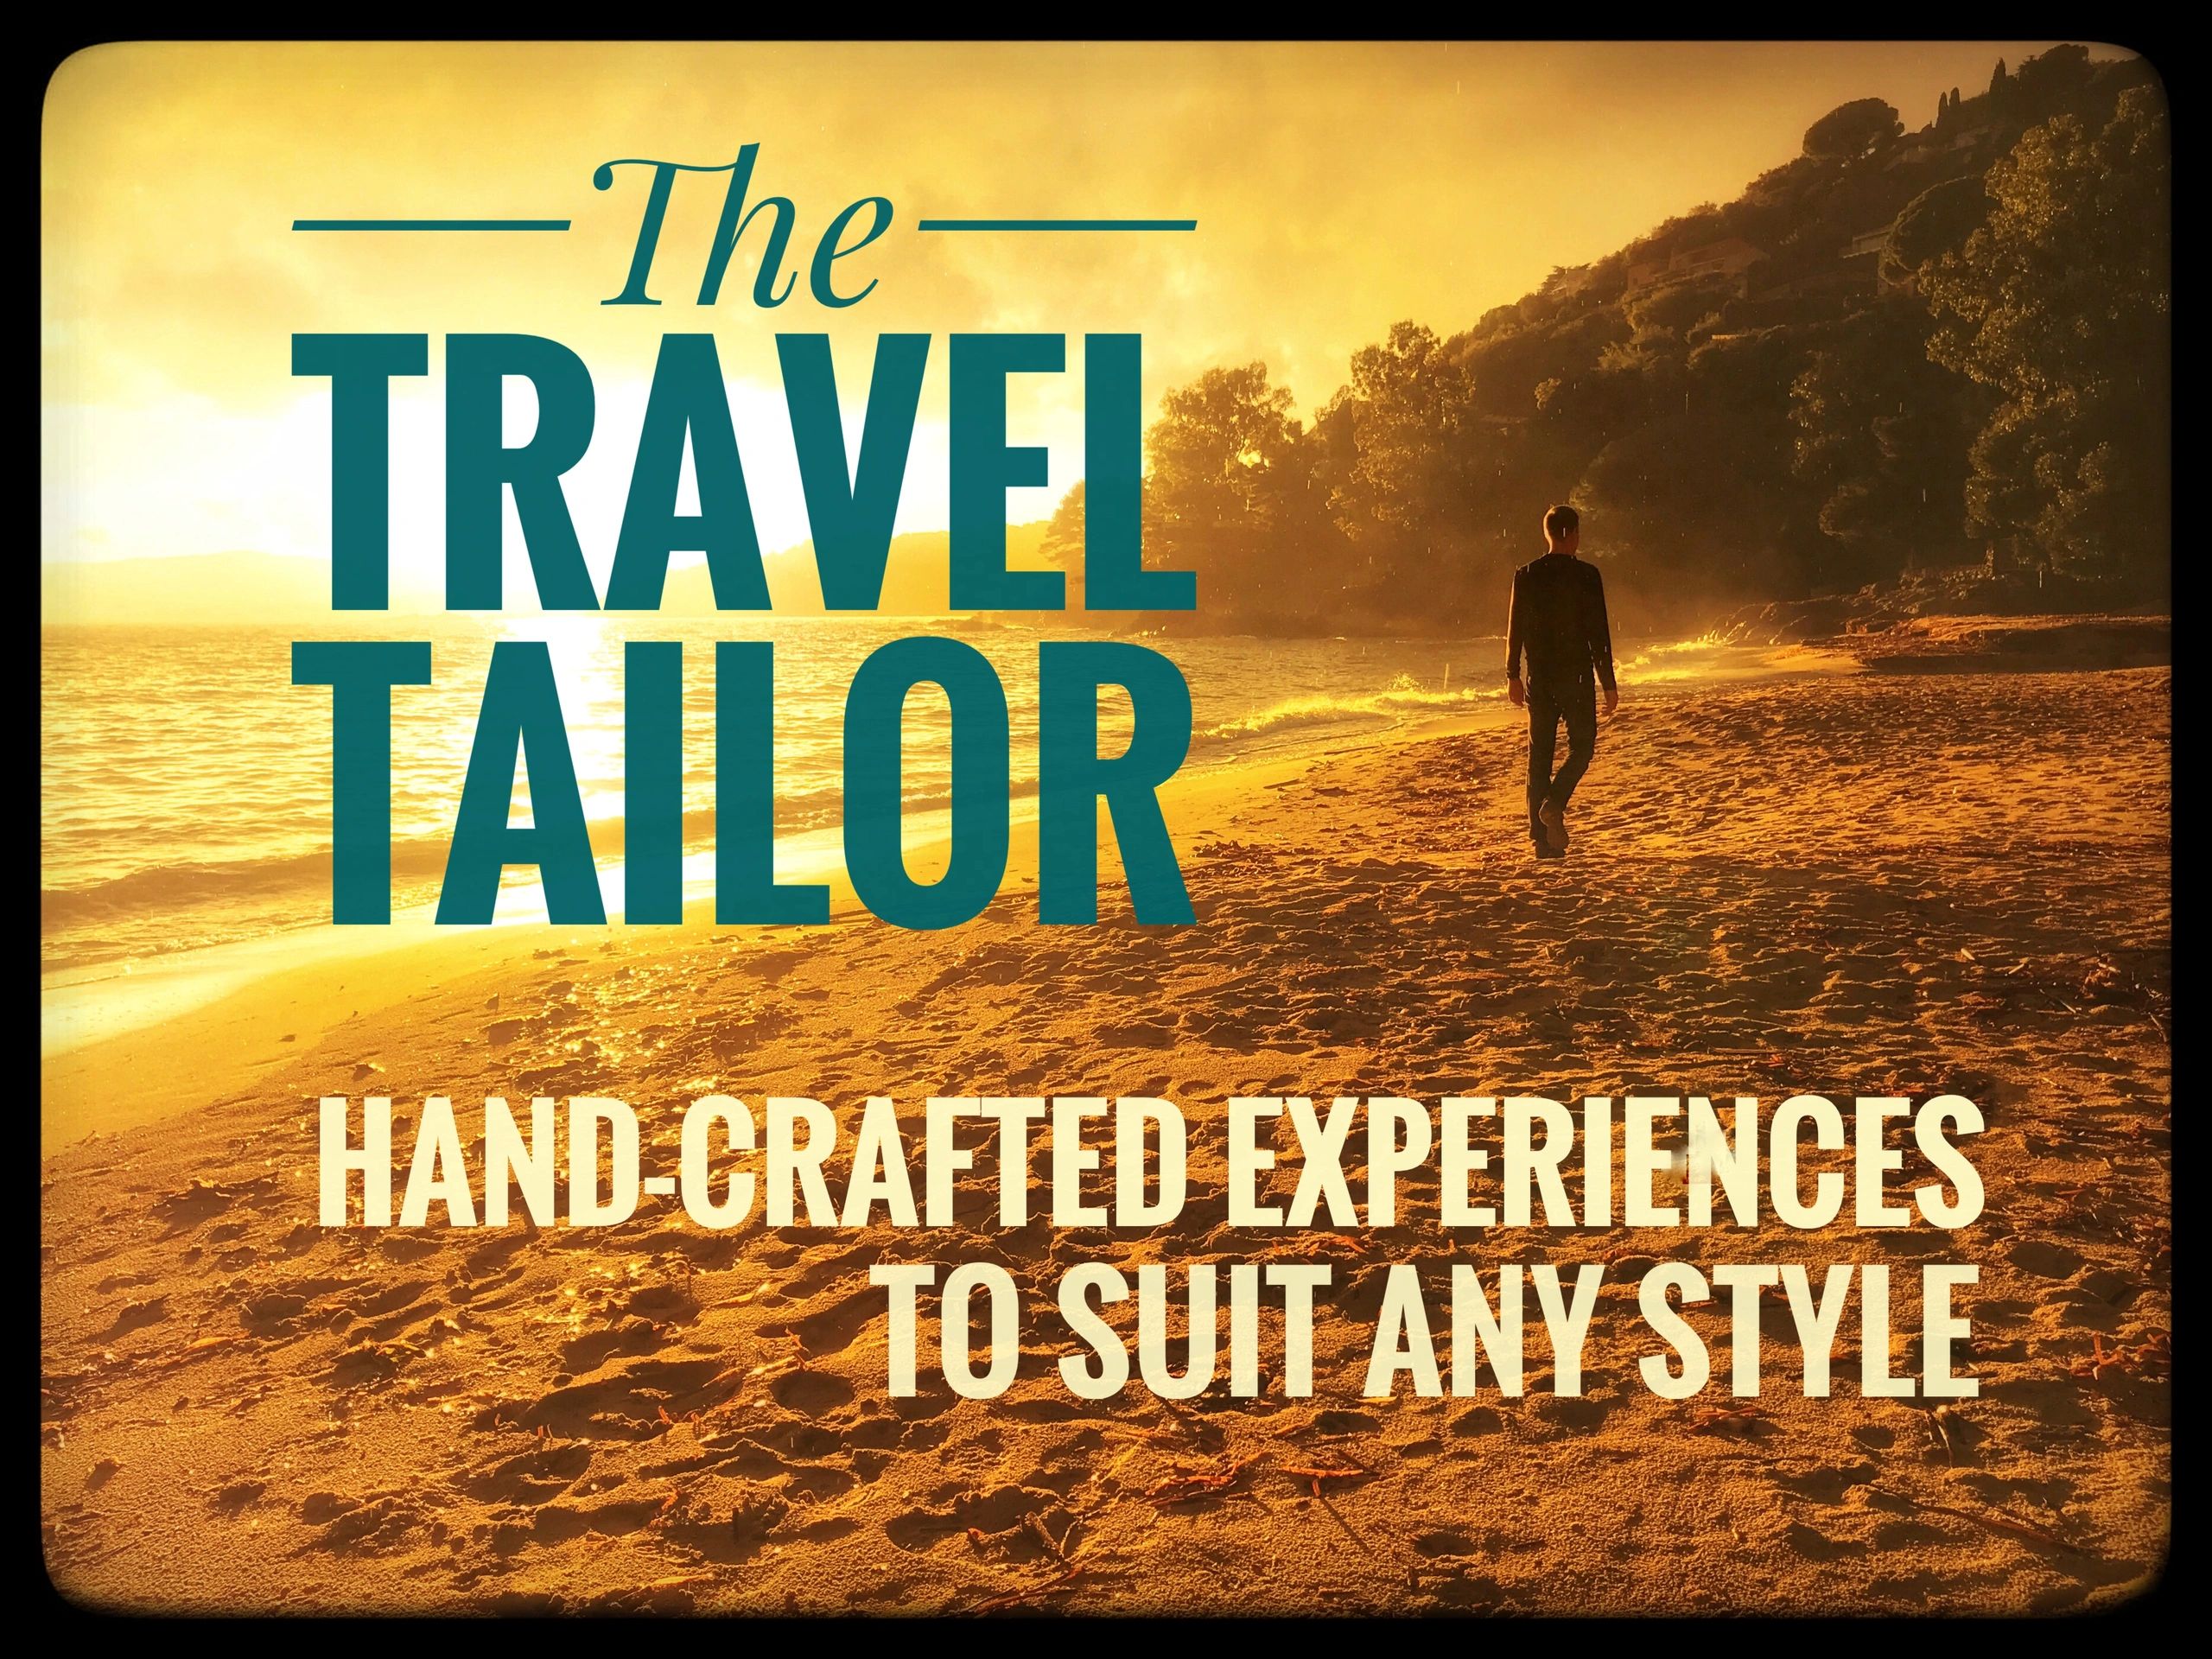 the tailor travel